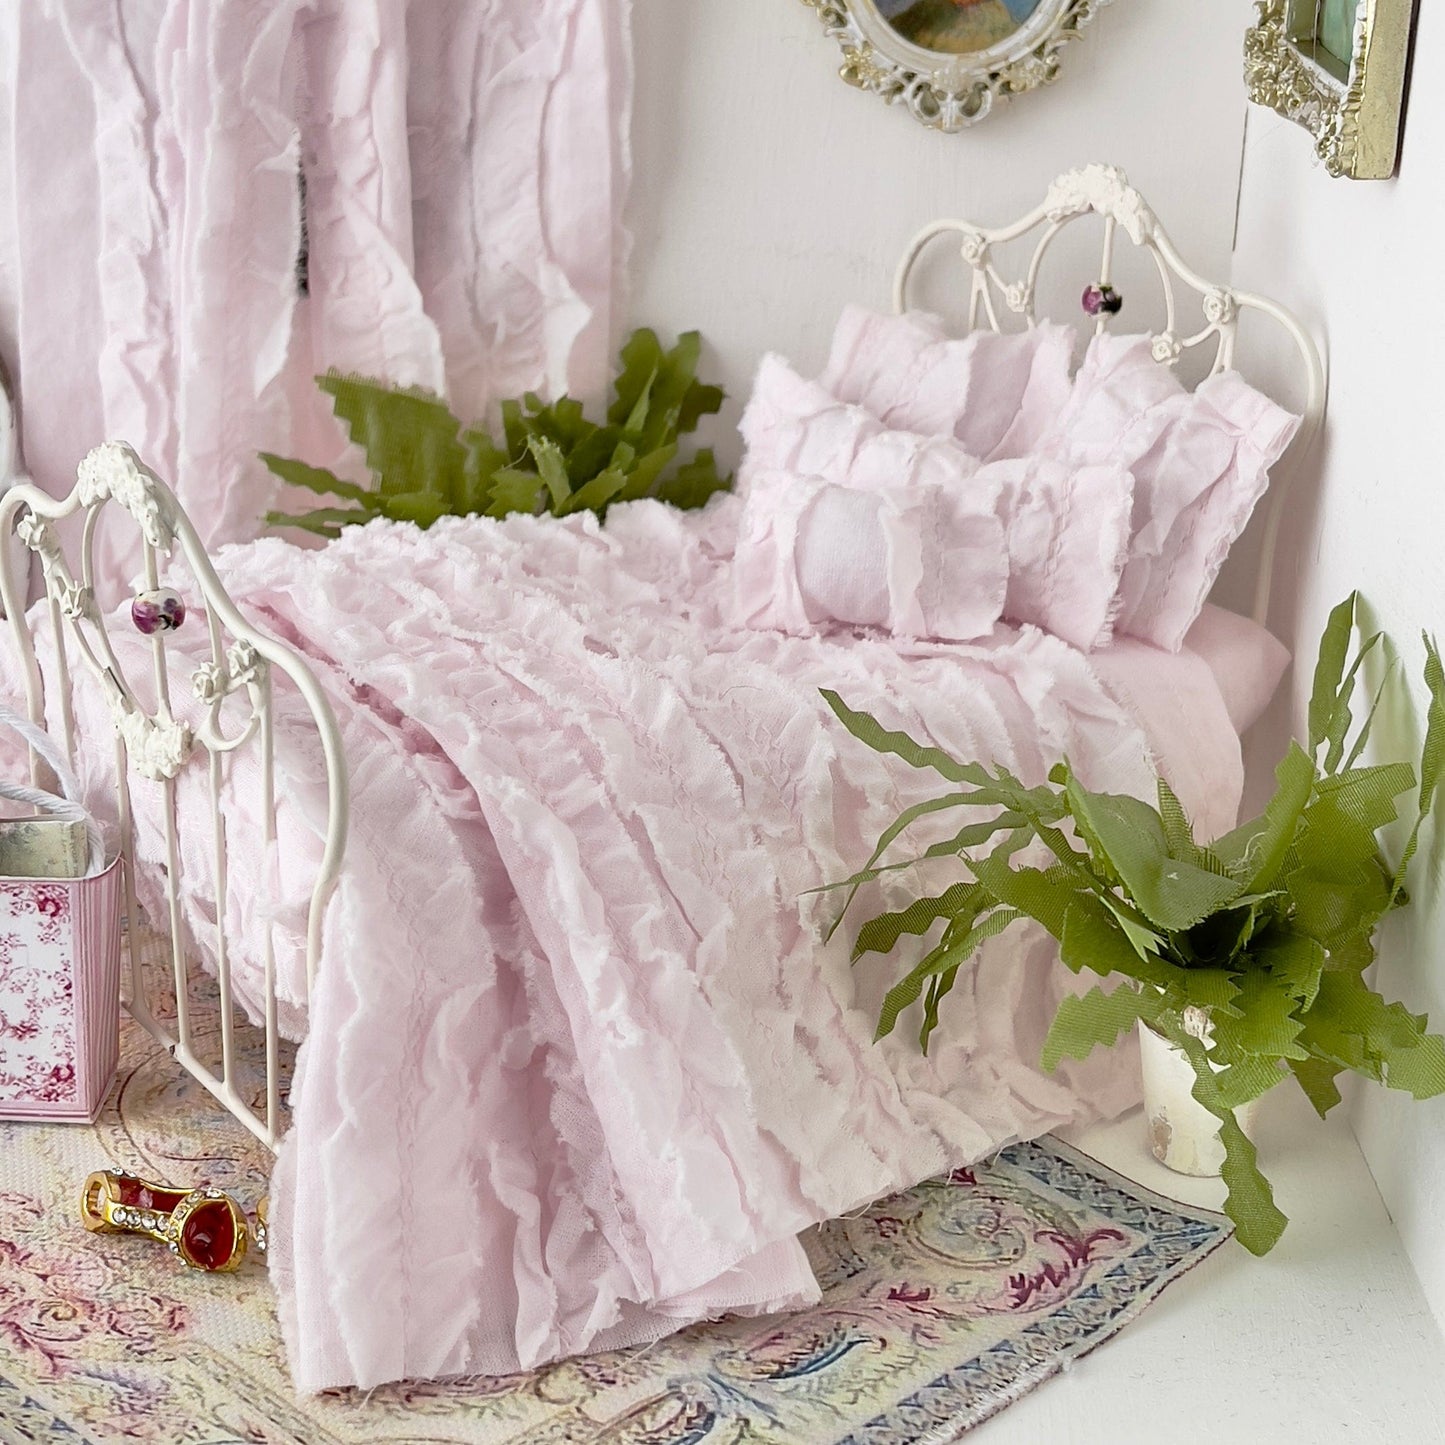 Chantallena White Bed Linens single/twin (10 in by 8 in) Tattered Romance |  Pink Cotton Lawn Distressed Ruffles Set | Emma